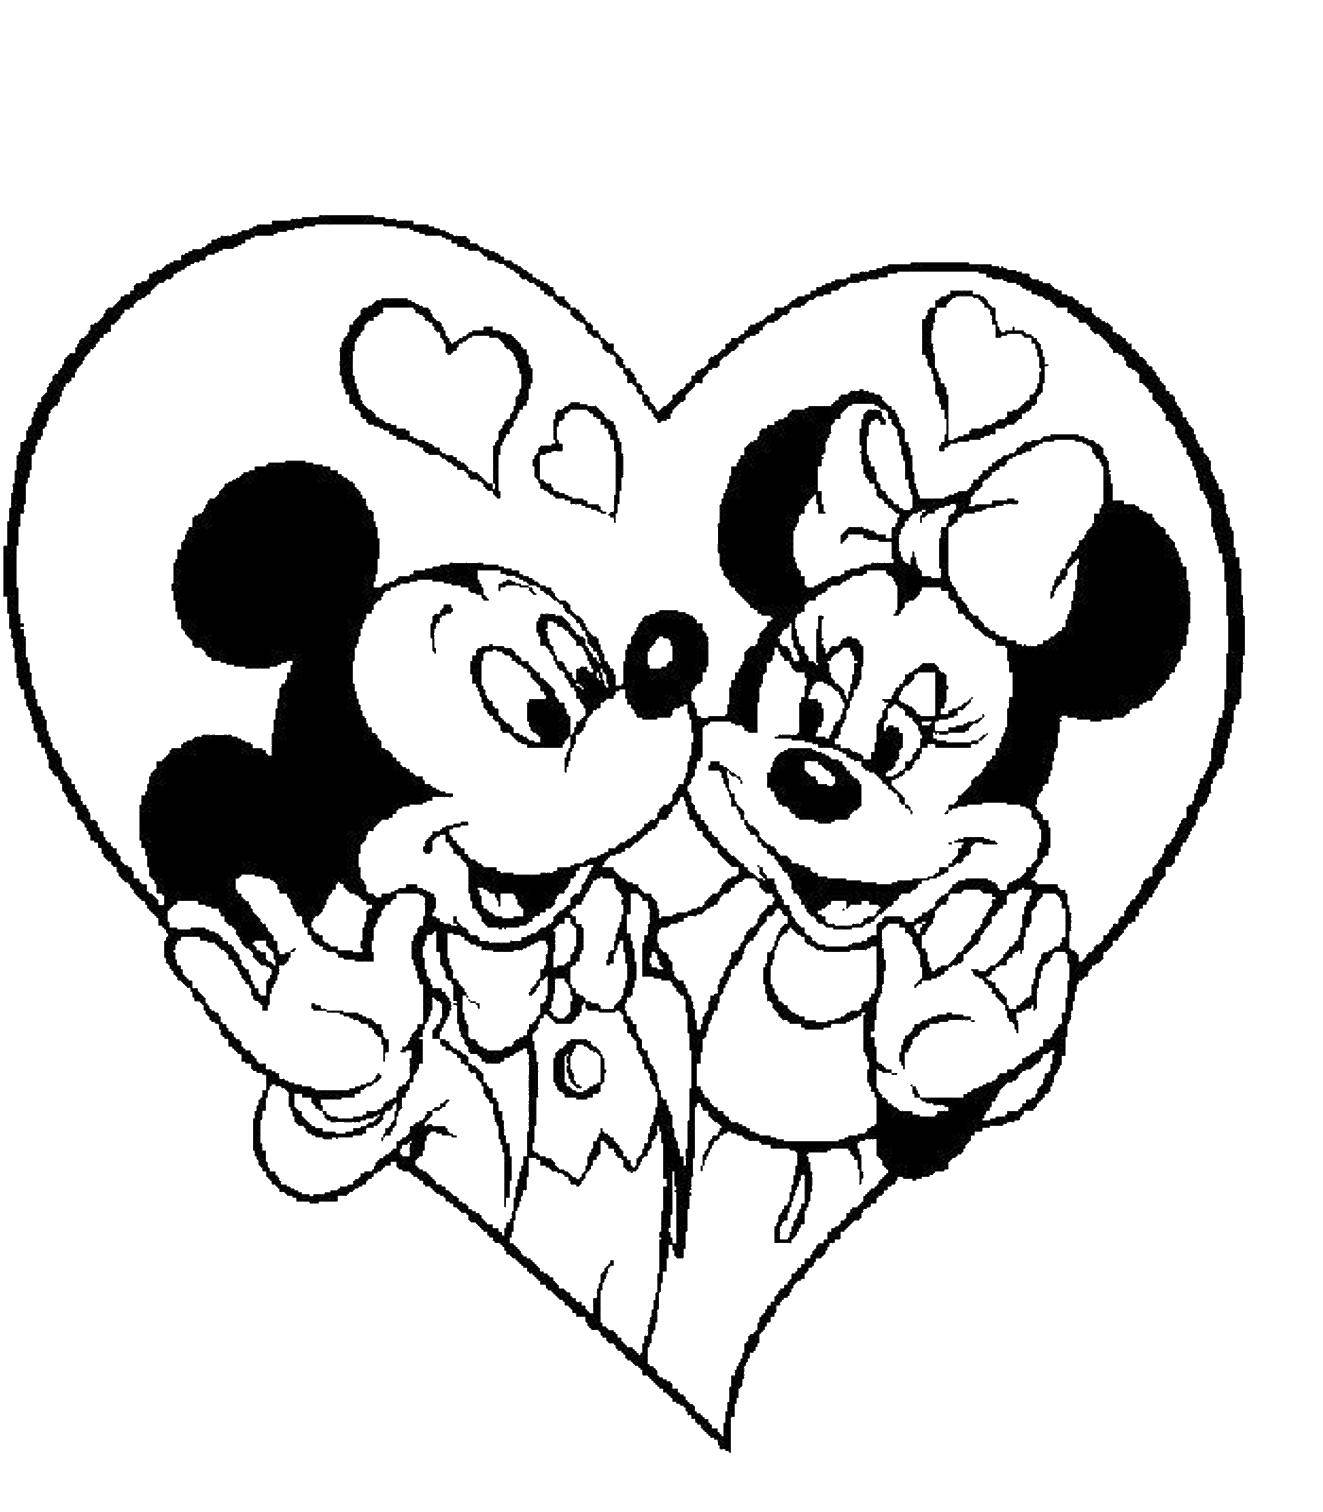 Coloring Mickey mouse. Category Mickey mouse. Tags:  Mickey mouse, love.